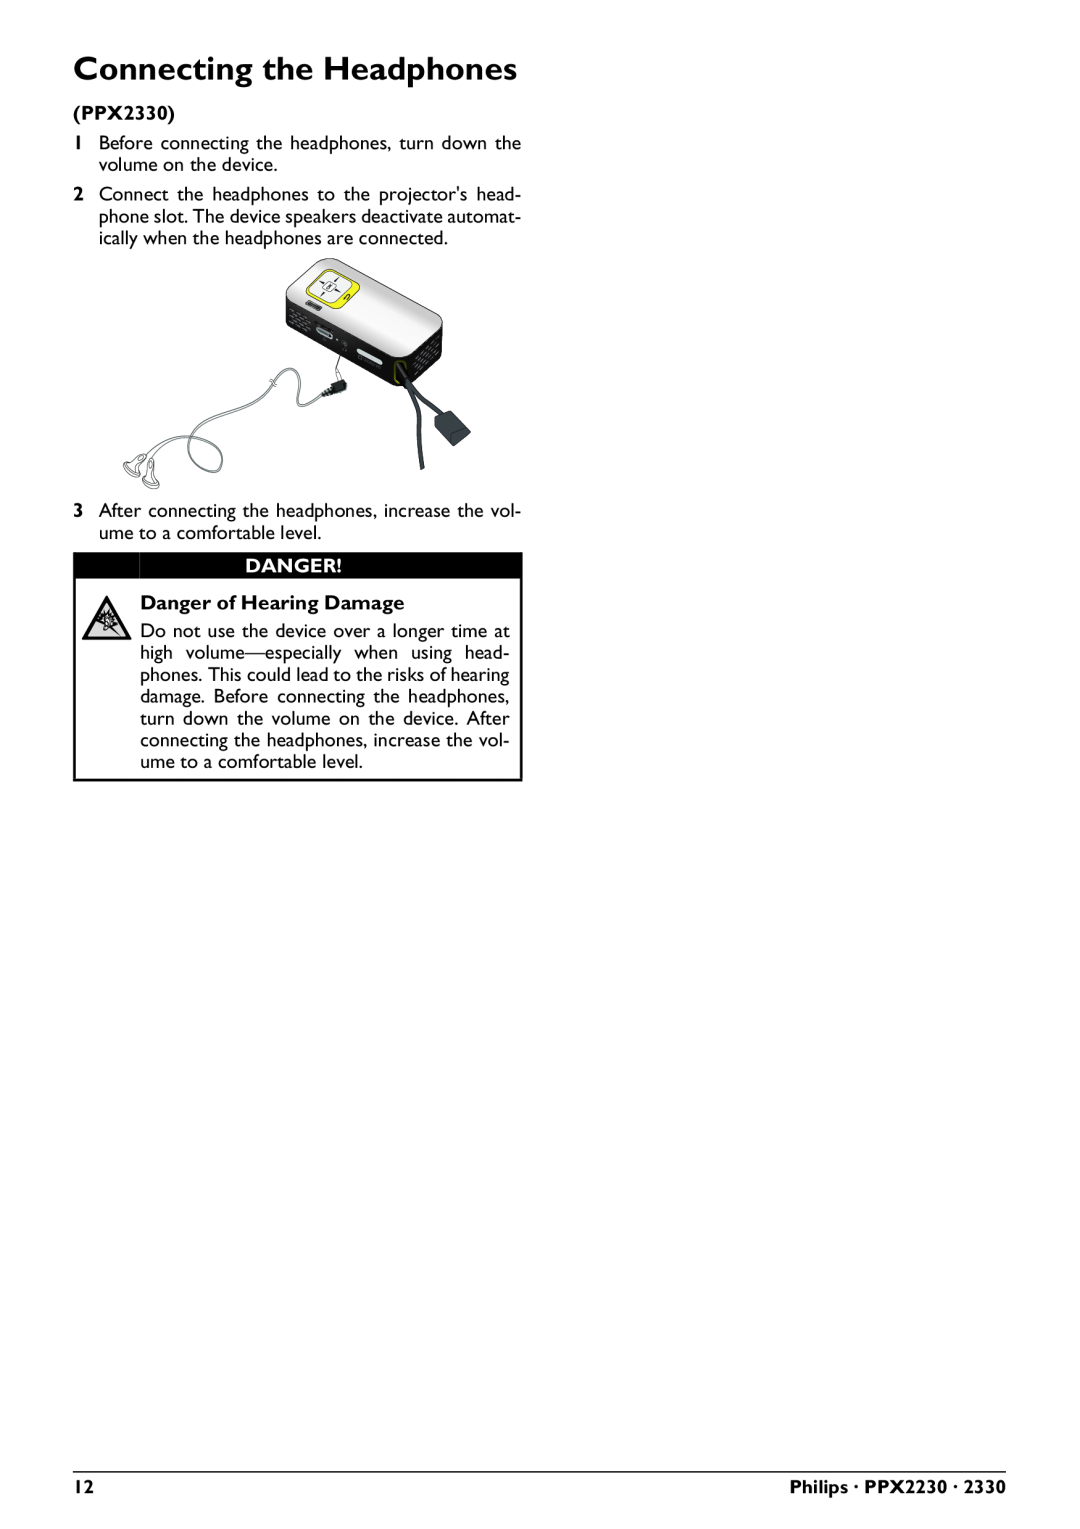 Philips PPX2330 user manual Connecting the Headphones, Danger of Hearing Damage, Philips · PPX2230 · 